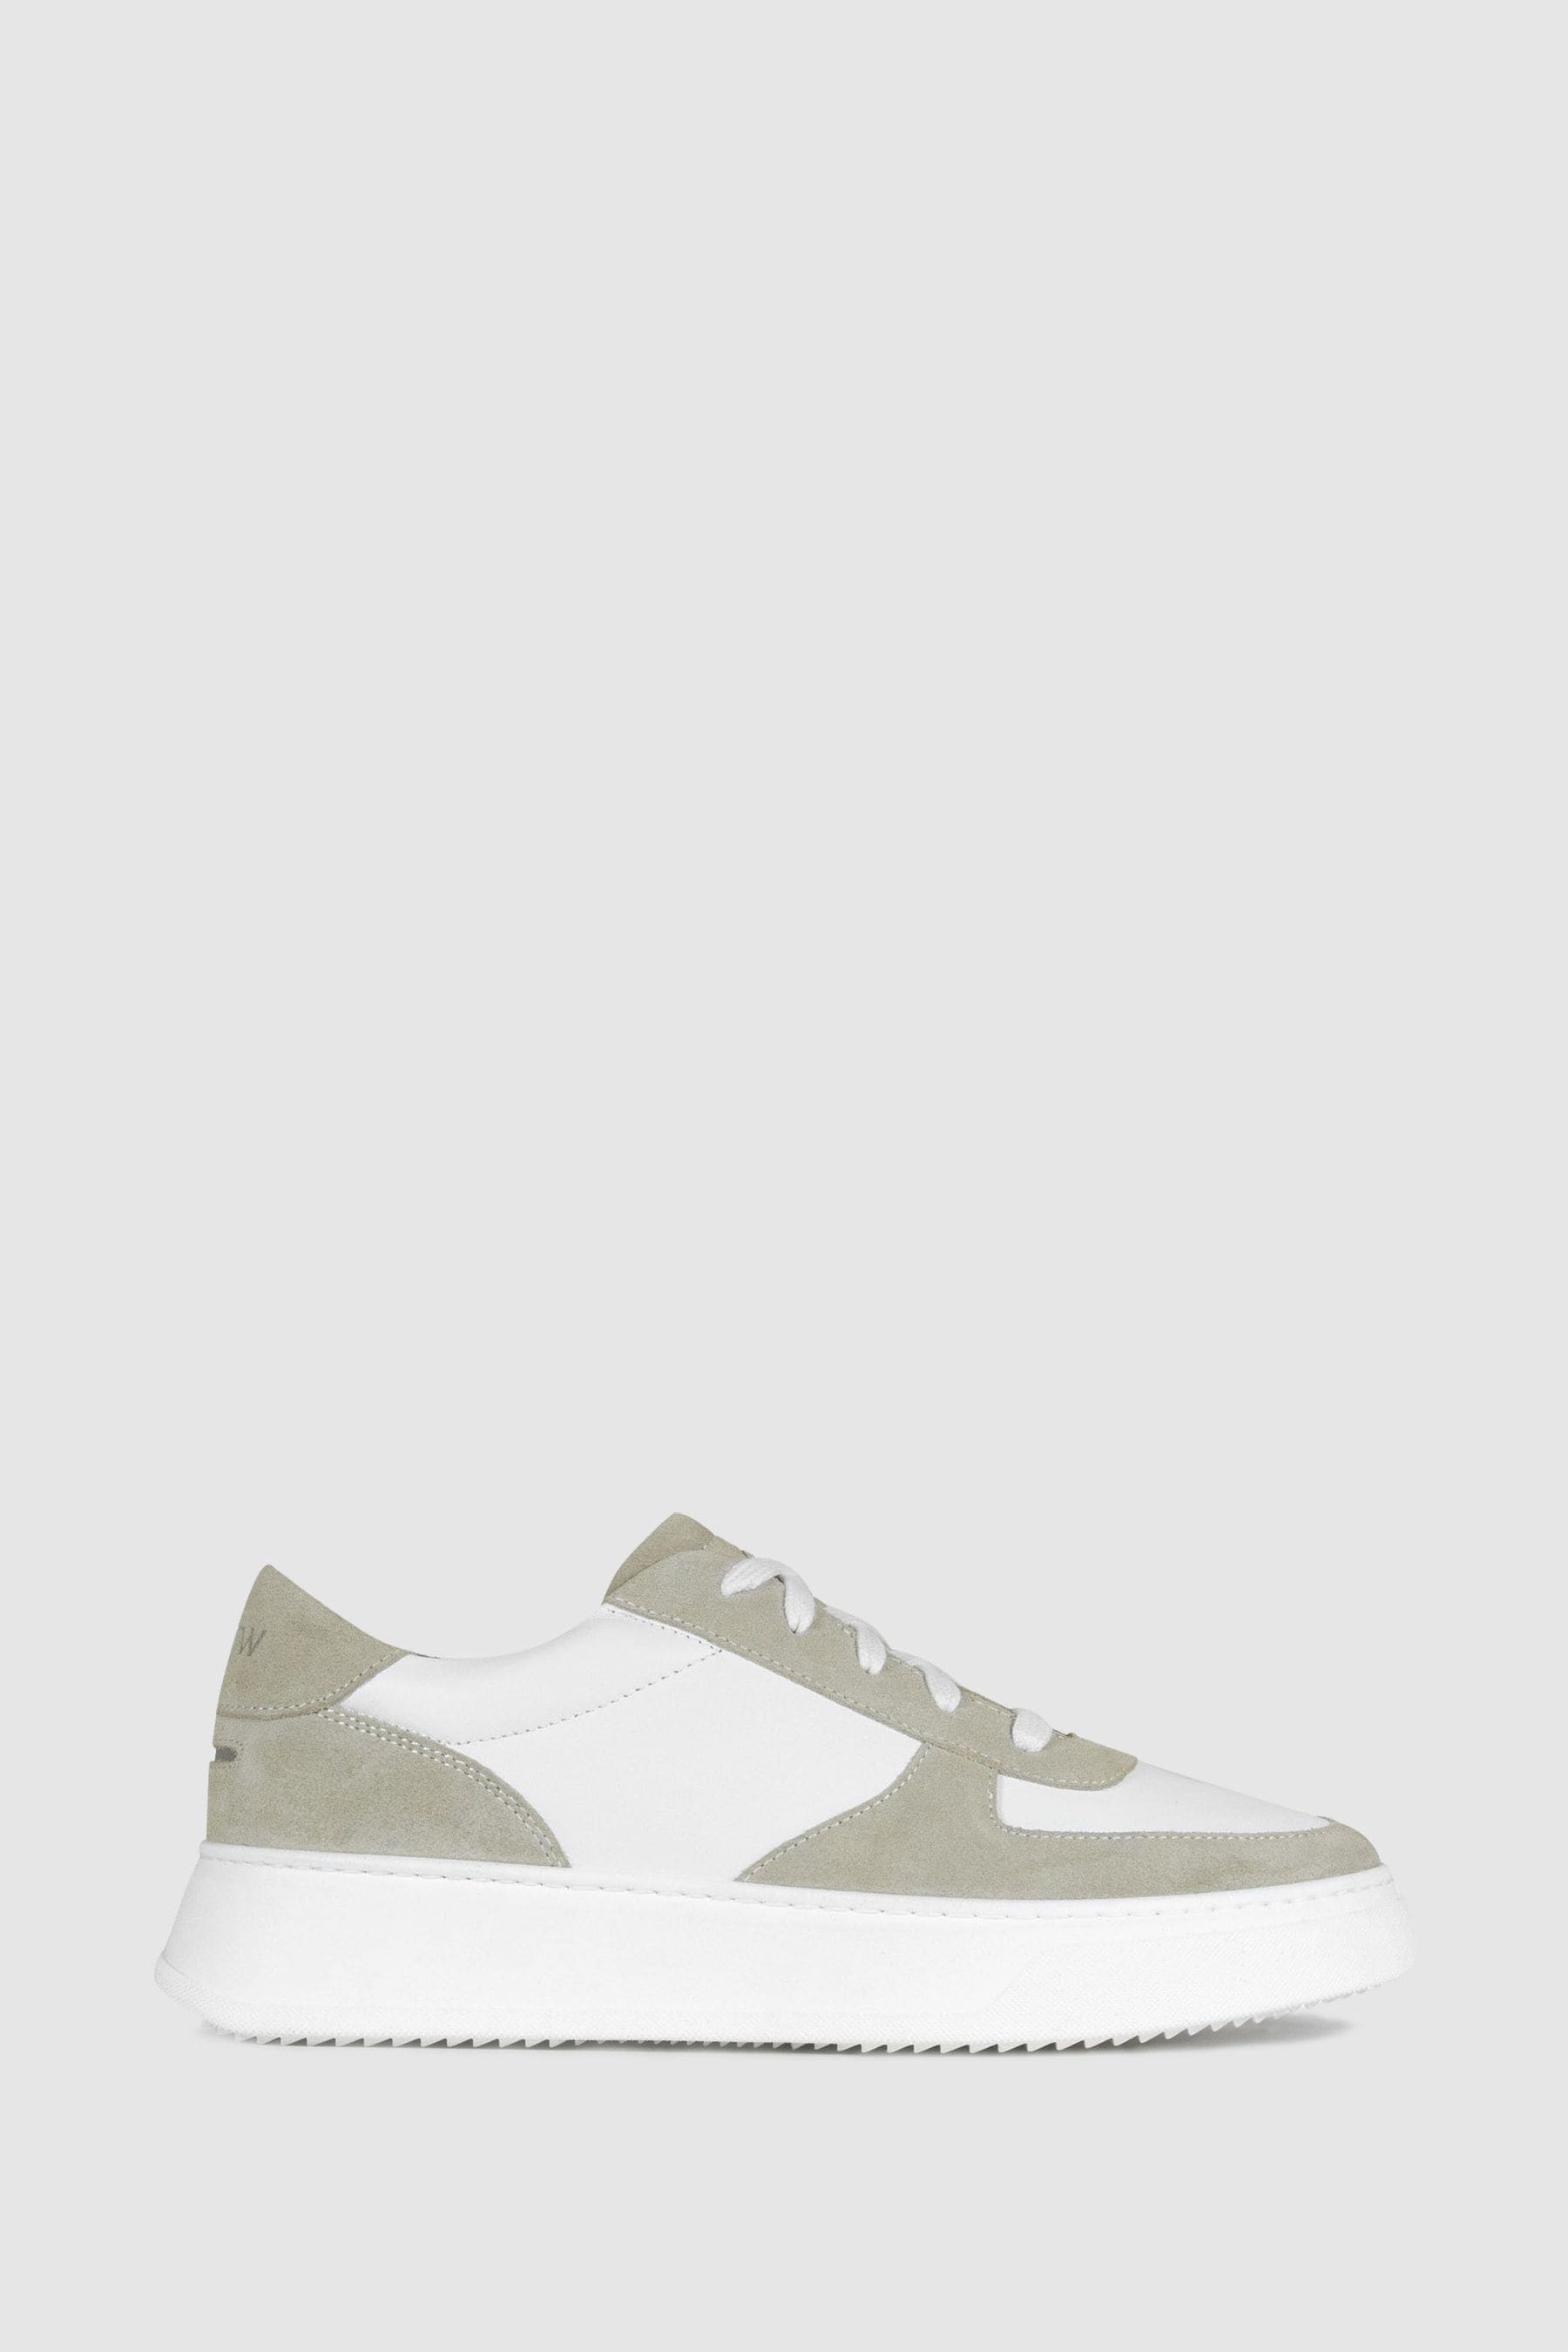 Unseen Footwear Leather Marais Trainers In Off White